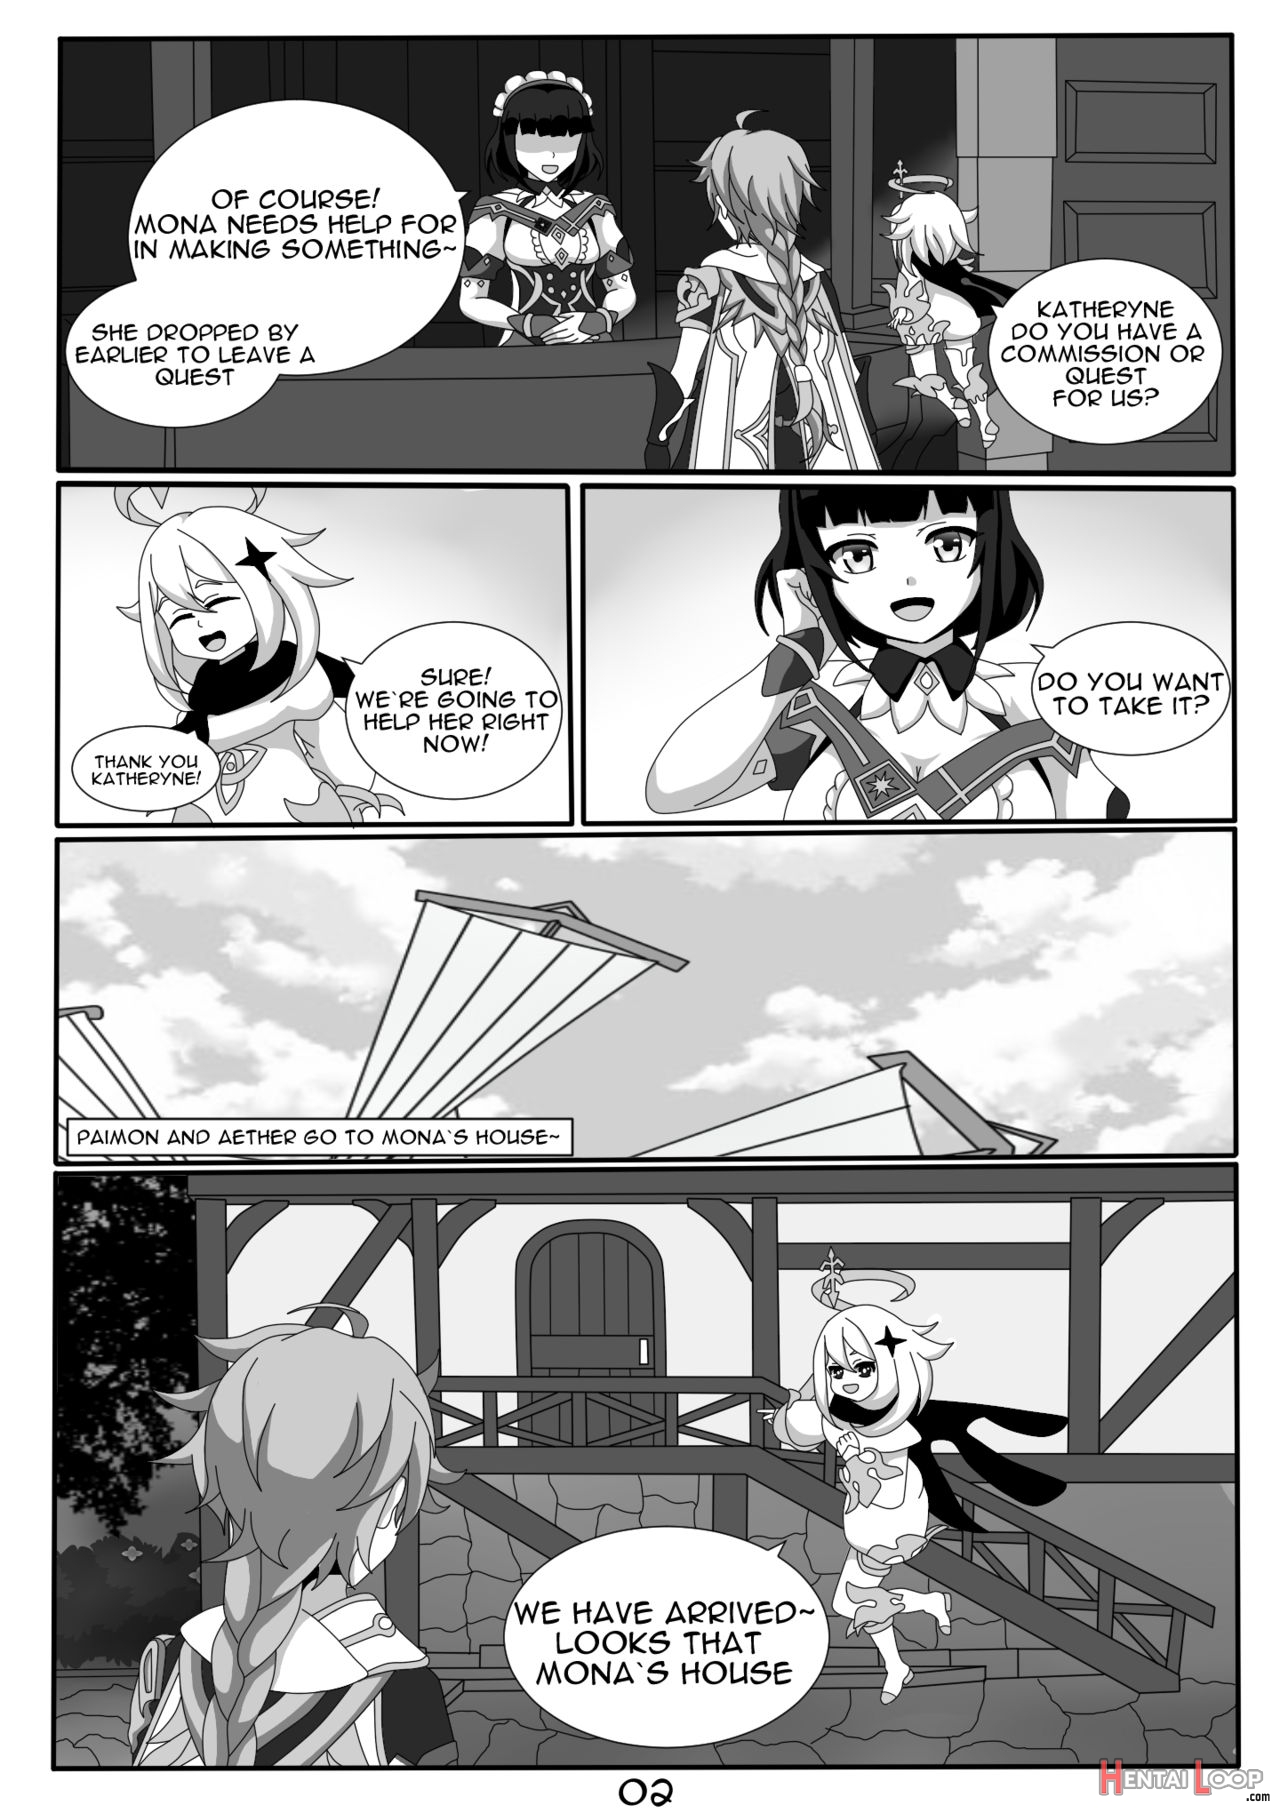 Quest Impact 1 page 5